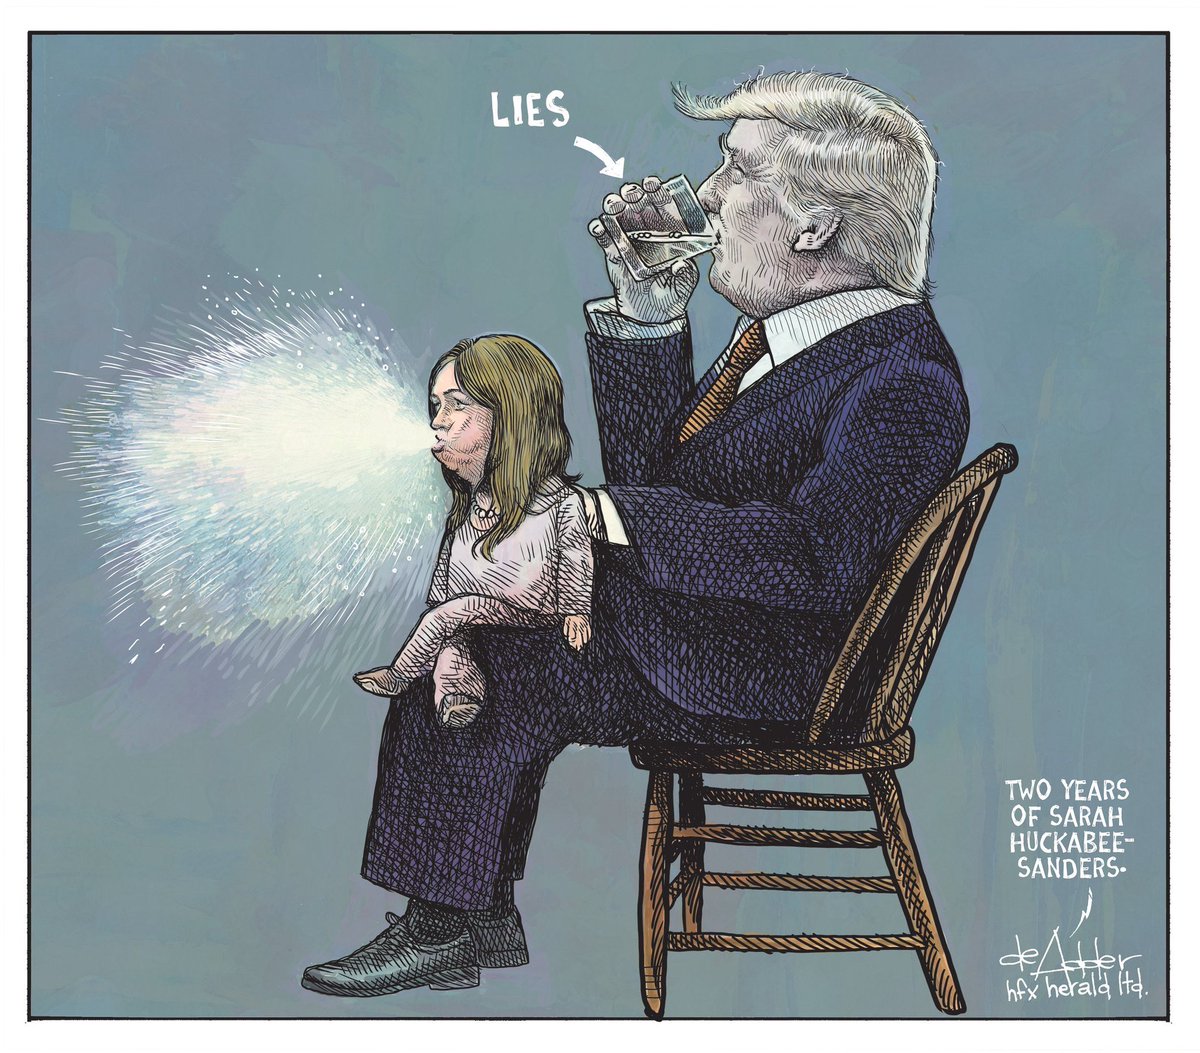 I’m doing a deep dive into some Trump Centered  @deAdder cartoons. Pls follow this brilliant artist if you enjoy these select cartoons. This is the first cartoon I saw and fell in with immediately